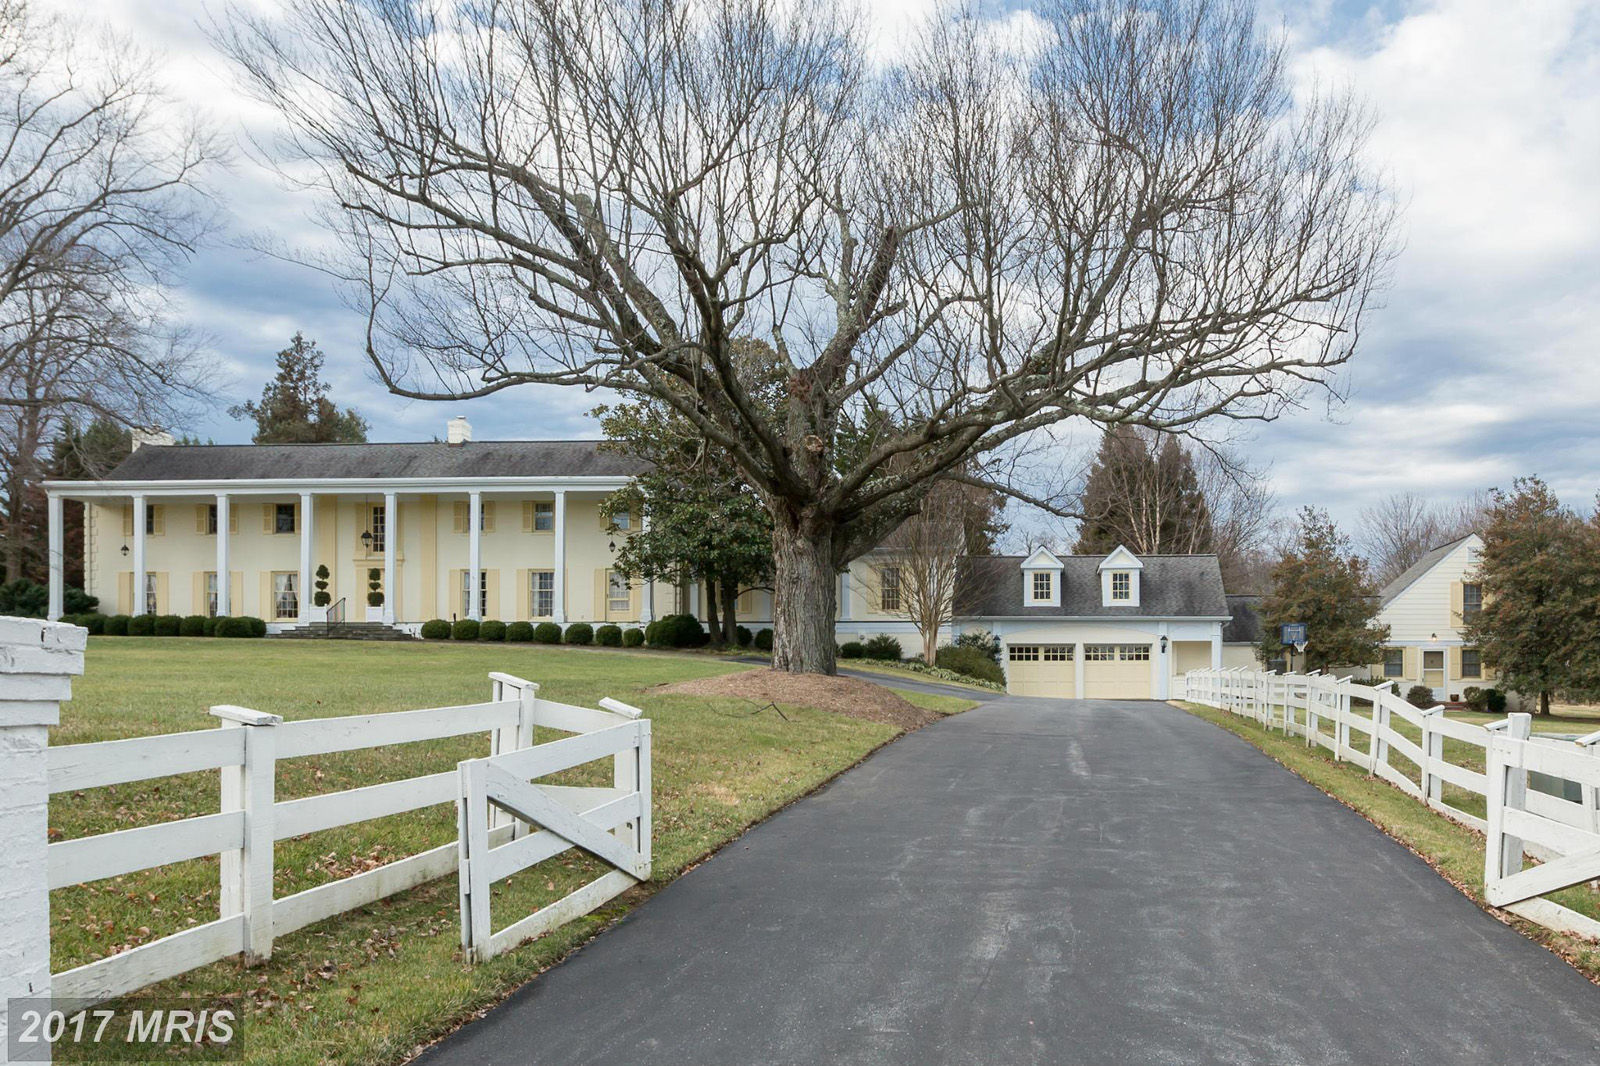 This five bedroom, four bathroom colonial style home built in 1937 sold for $3.35M on Sept. 15 in Potomac, Maryland. (Courtesy Bright MLS)